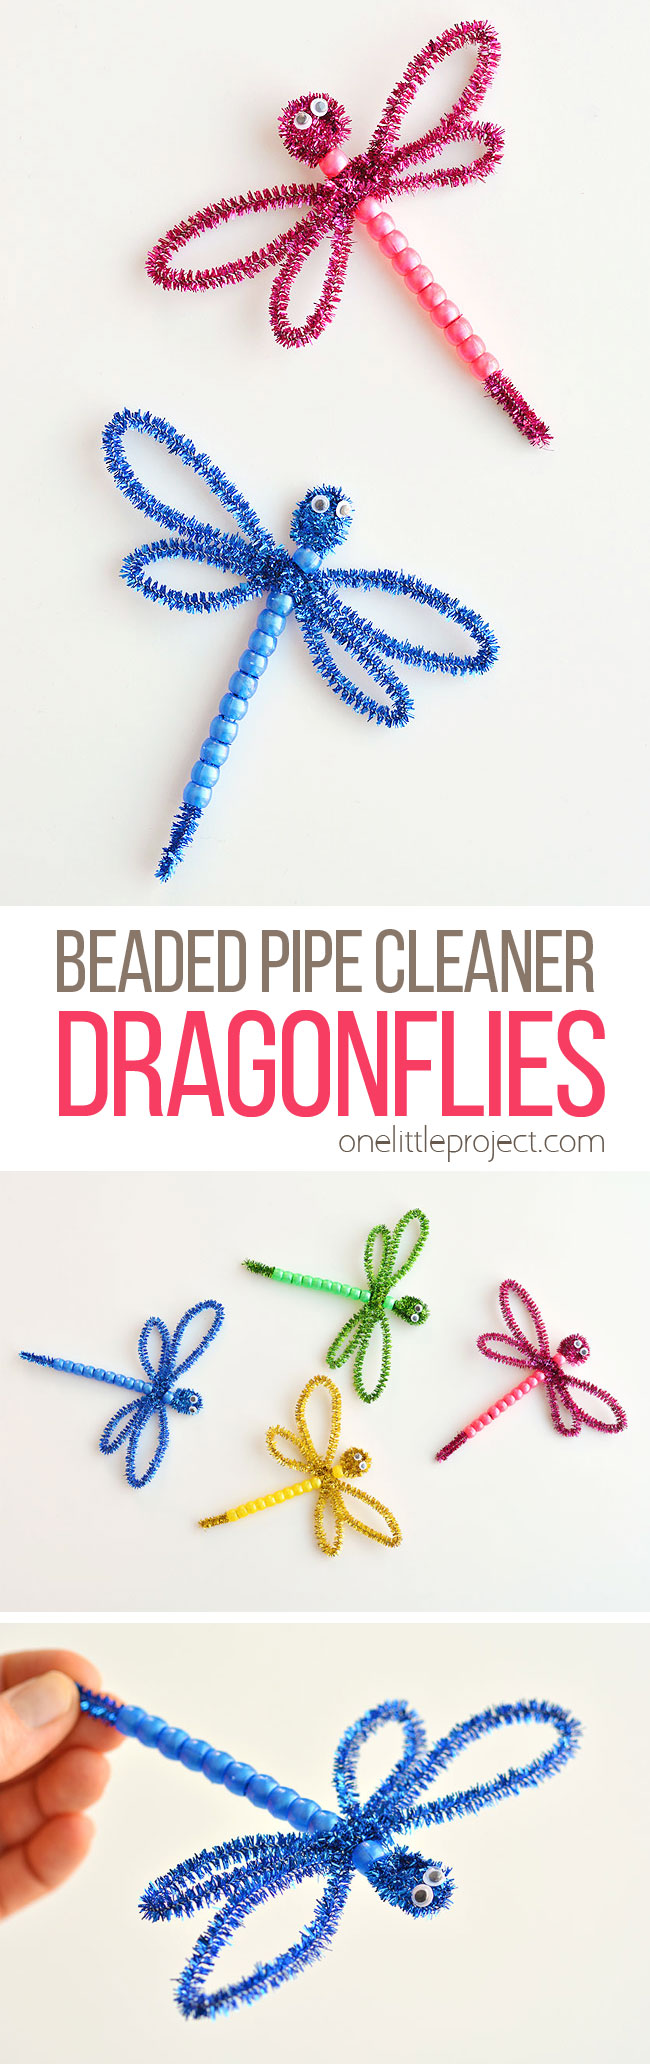 These beaded pipe cleaner dragonflies are SO CUTE! And they're so easy to make! All you need are pipe cleaners, plastic pony beads and googly eyes and you can whip one up in less than 5 minutes! This is such a fun kids craft that they can actually play with when they're done! A great kids activity for spring and summer!